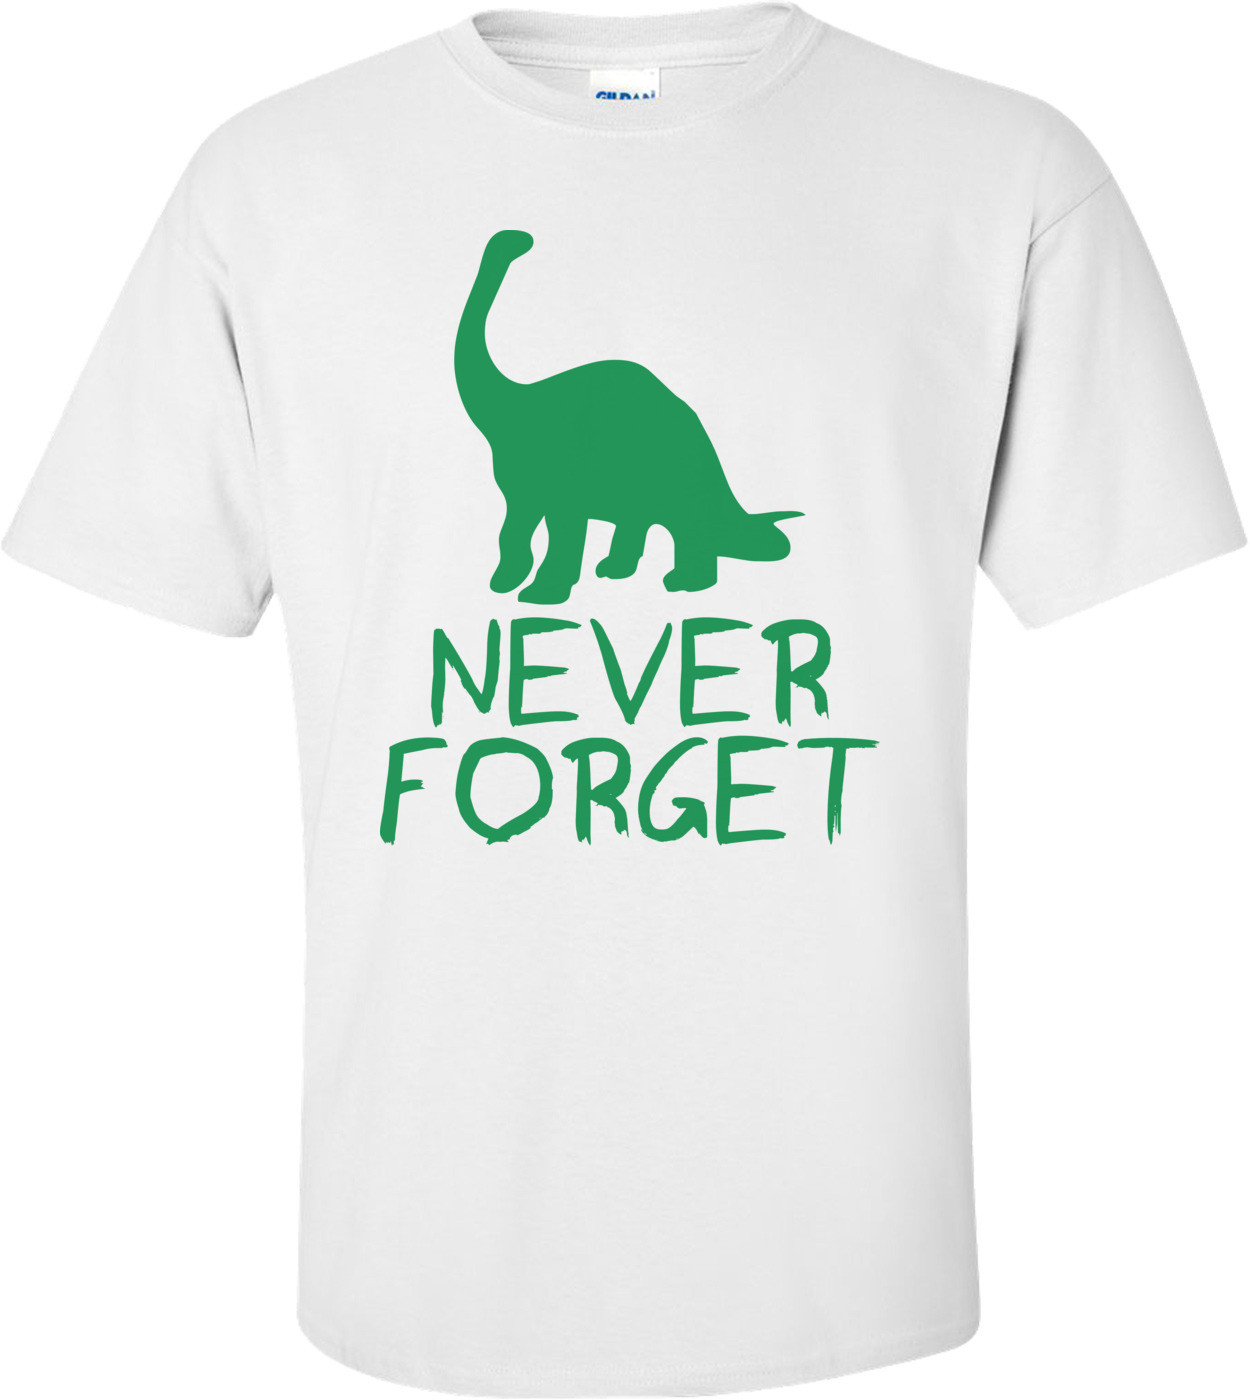 Never Forget The Dinosaurs Shirt